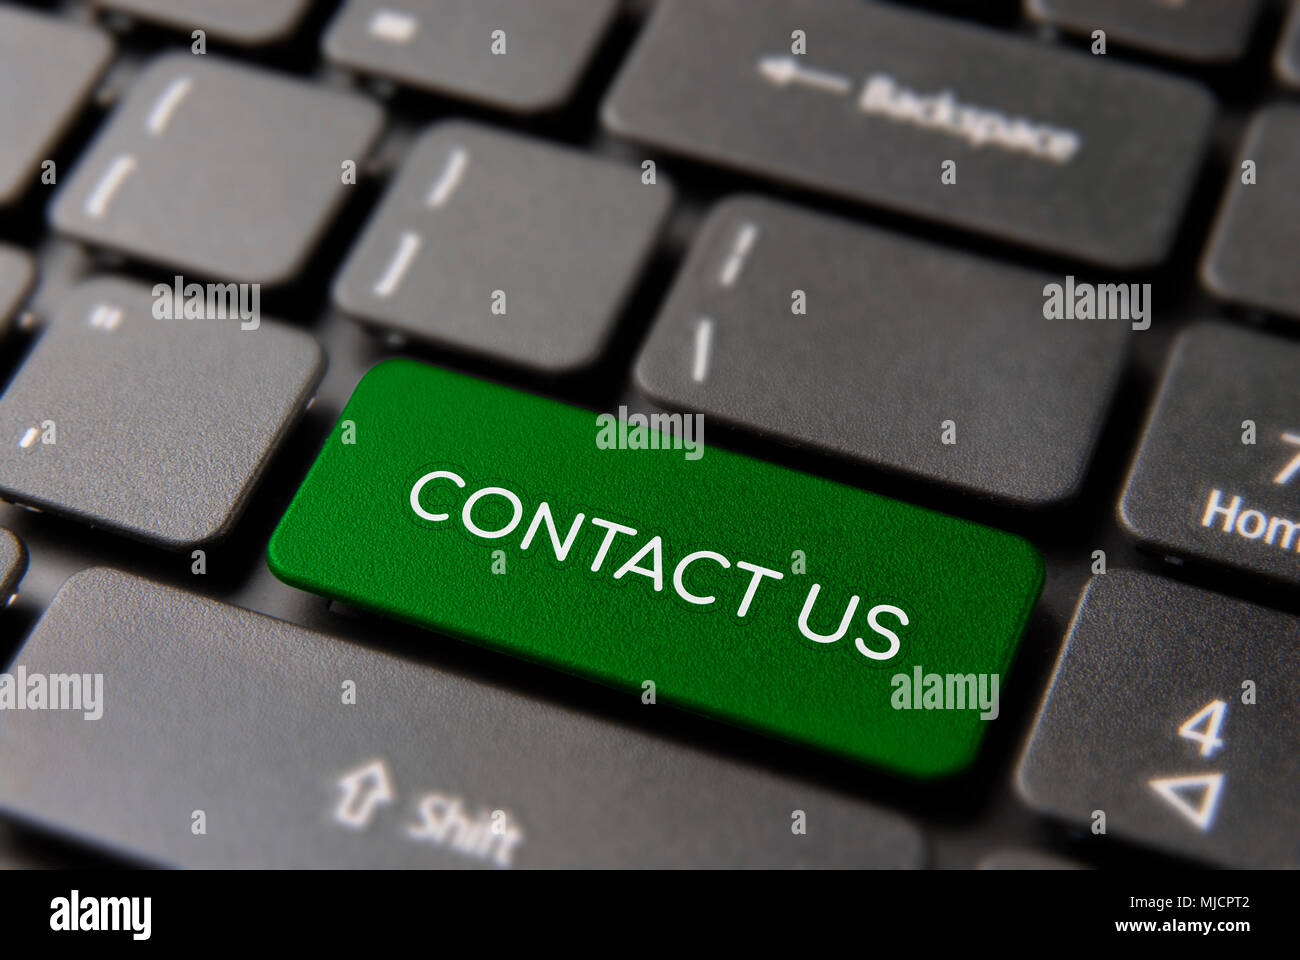 Contact us computer keyboard button for business service concept. Laptop icon key in green color. Stock Photo